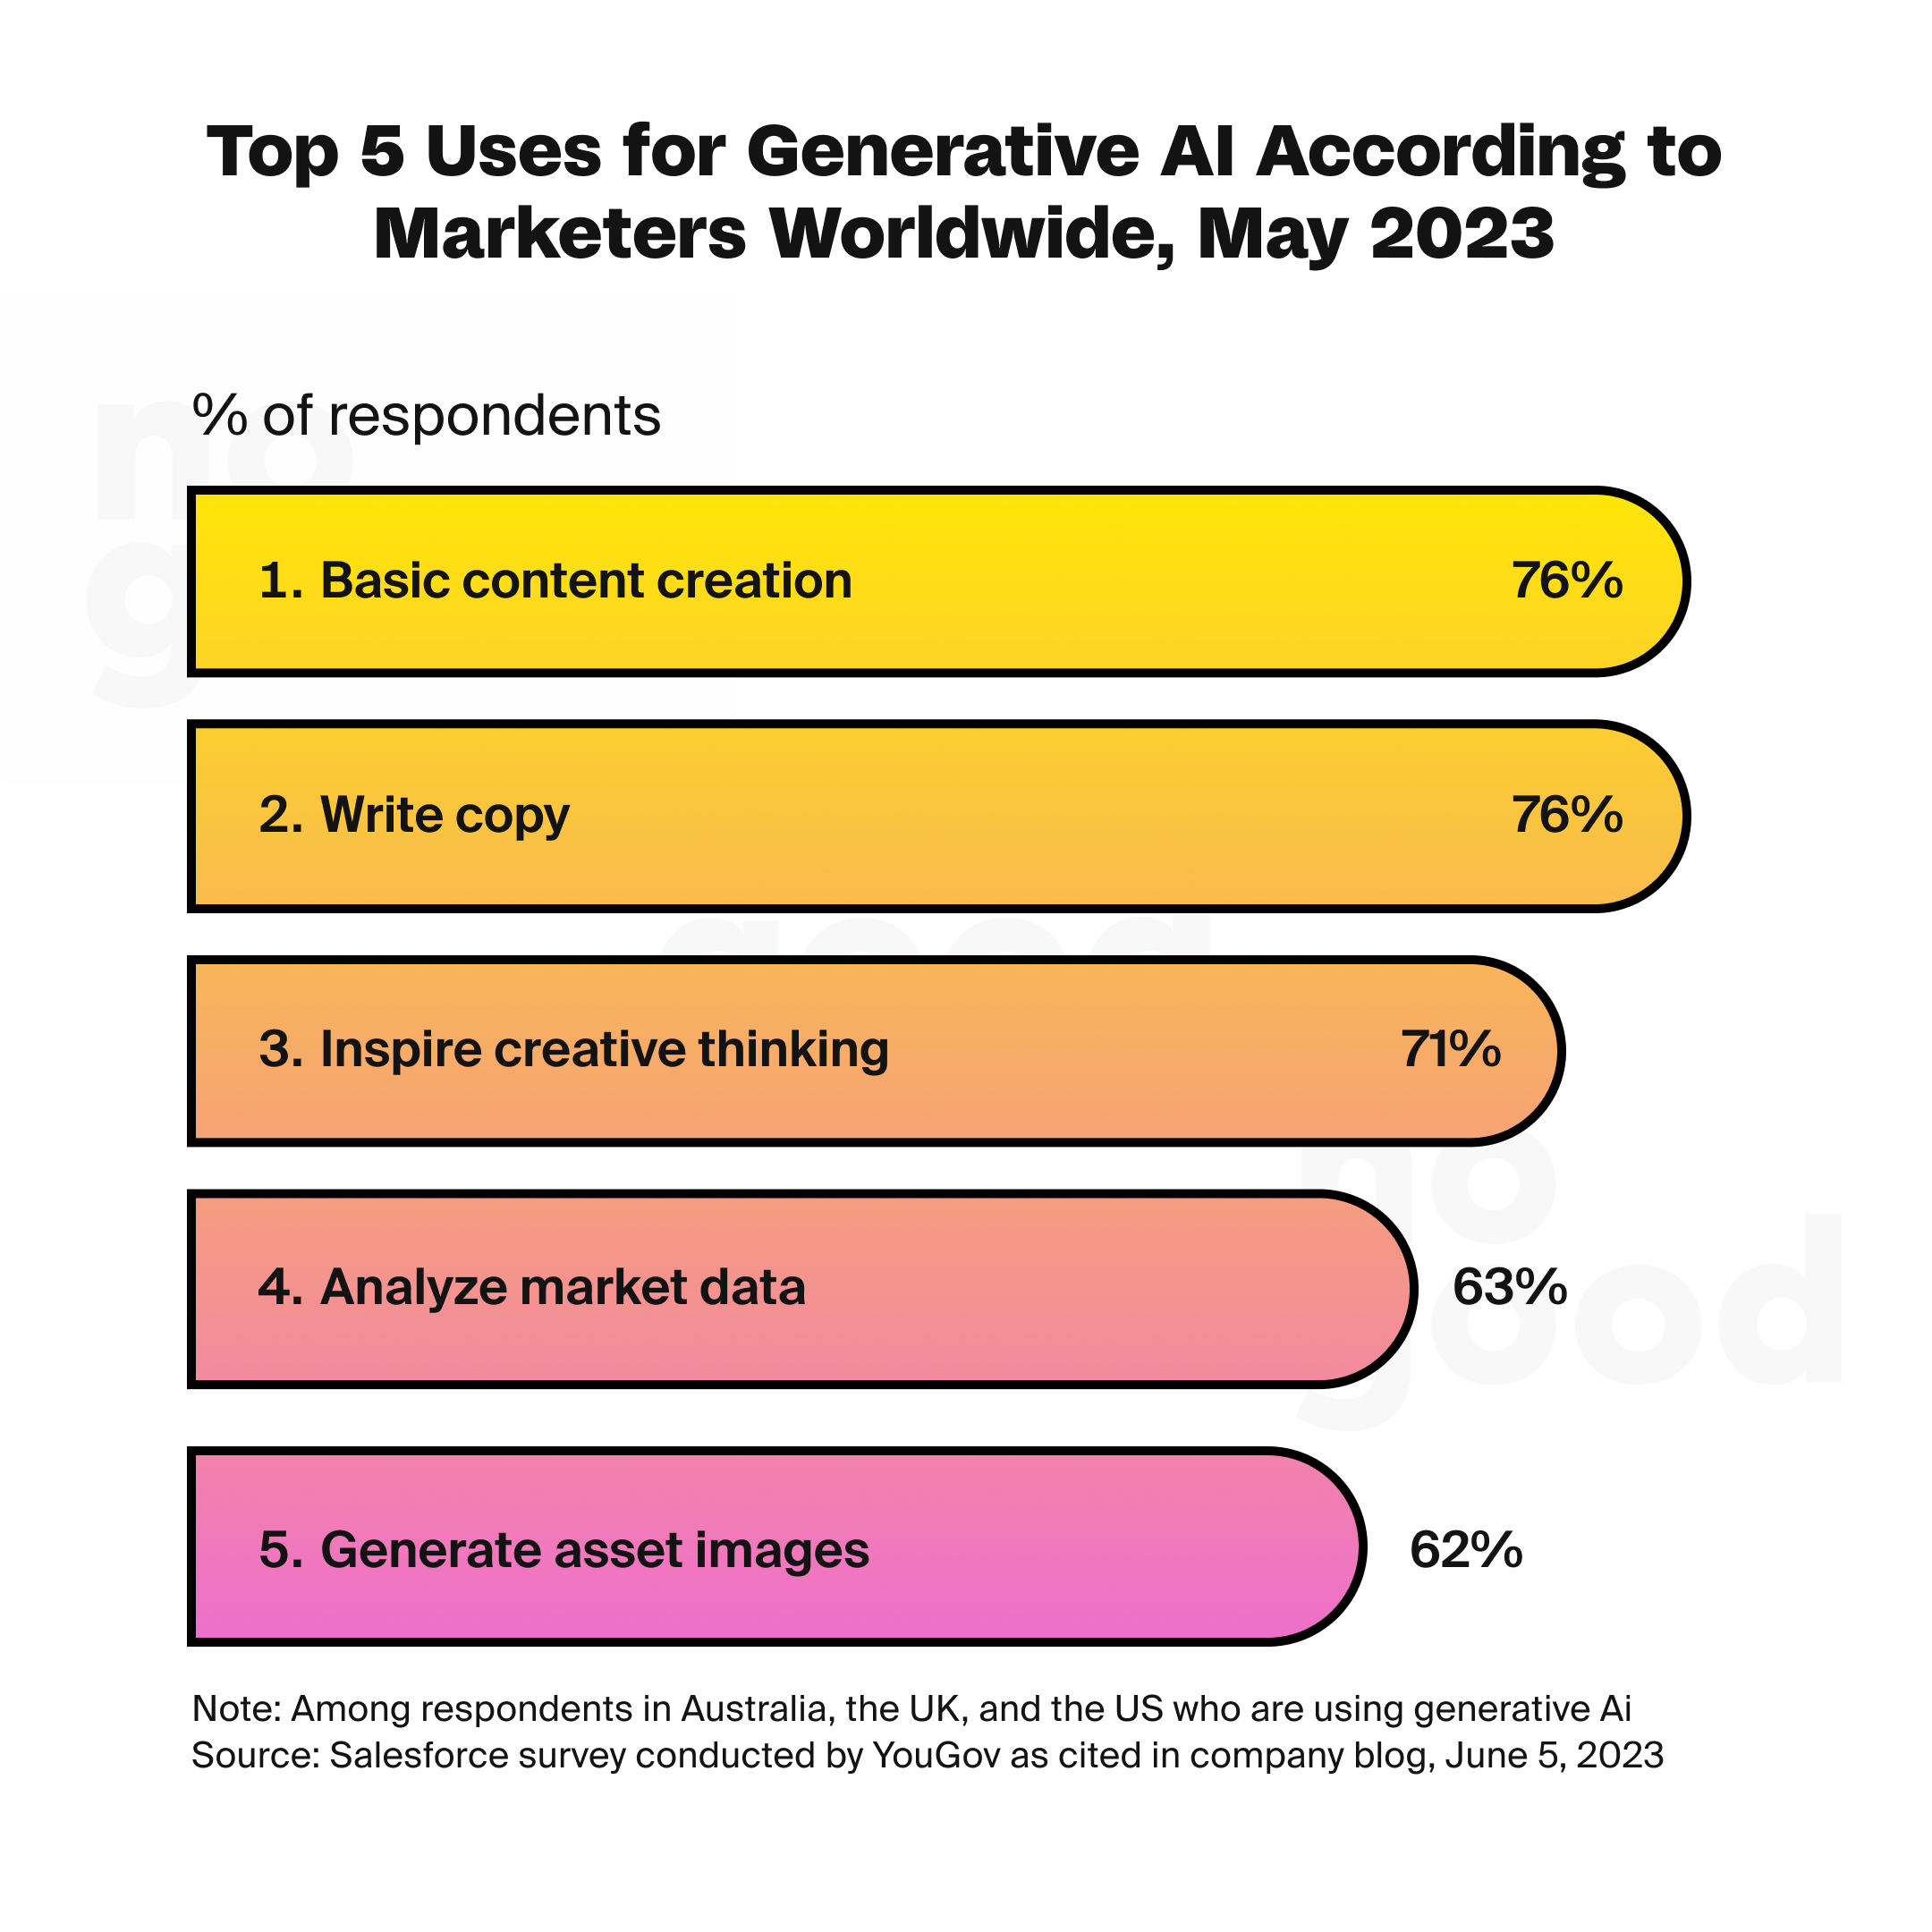 Top 5 uses for generative AI according to marketers:
1. Basic content creation
2. Write copy
3. Inspire creative thinking
4. Analyze market data
5. Generate asset images